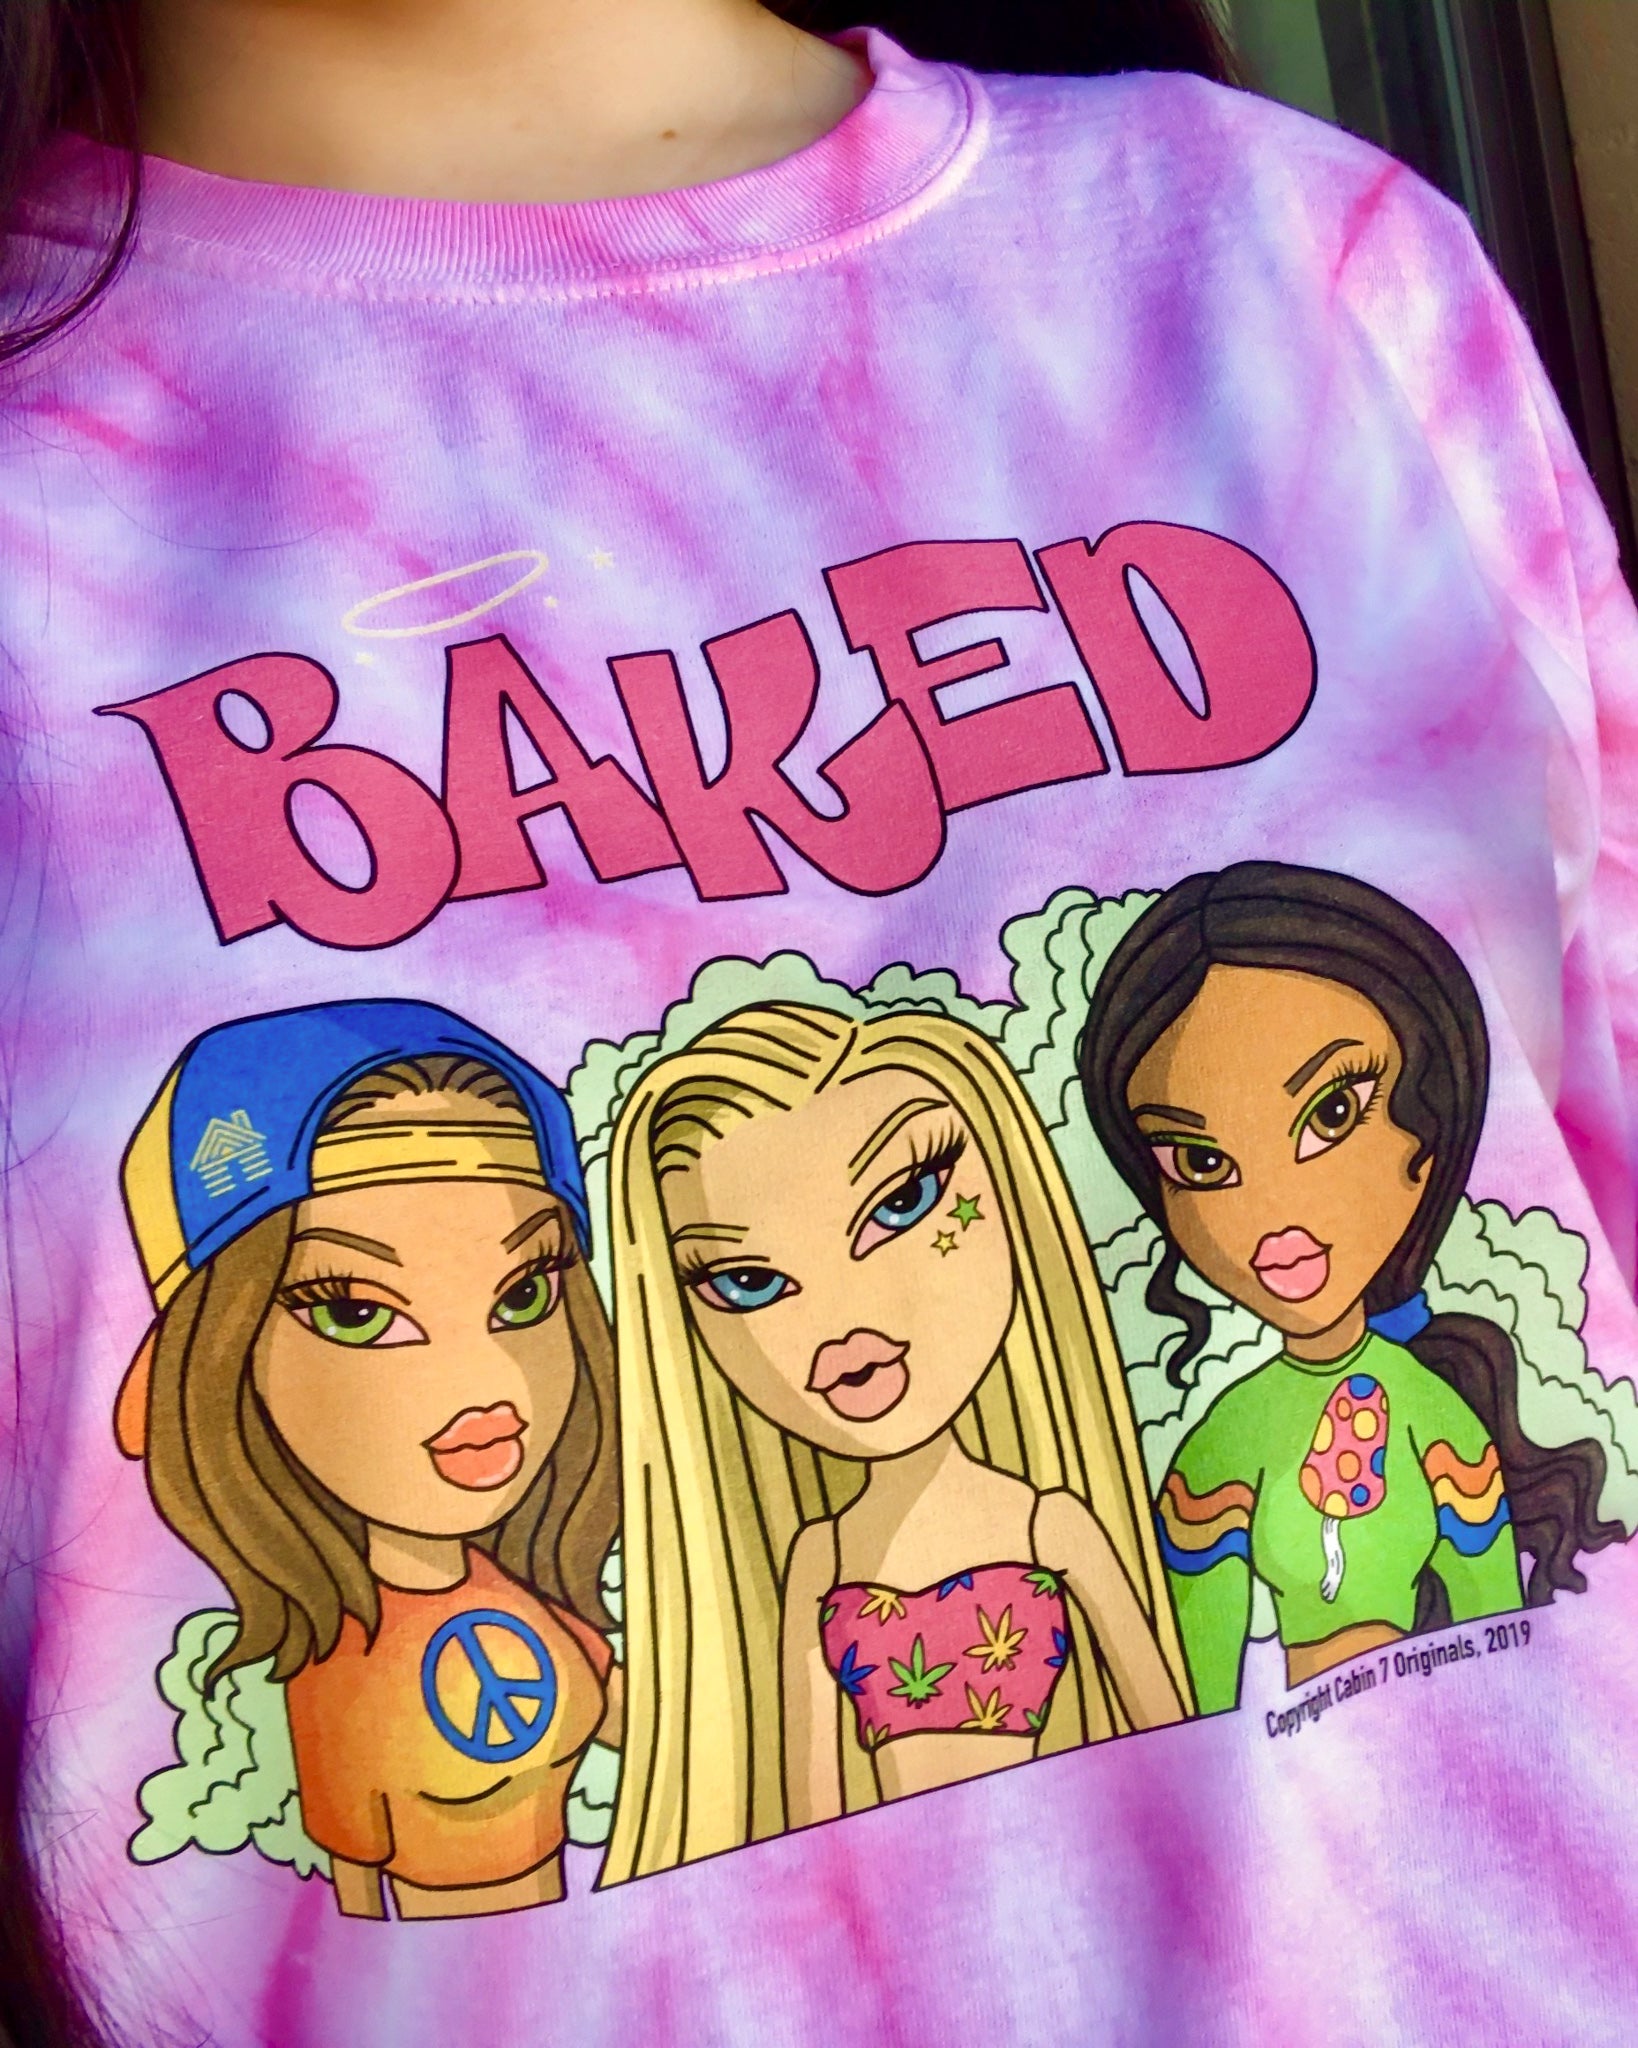 Baked Babes Tie Dye T-Shirt